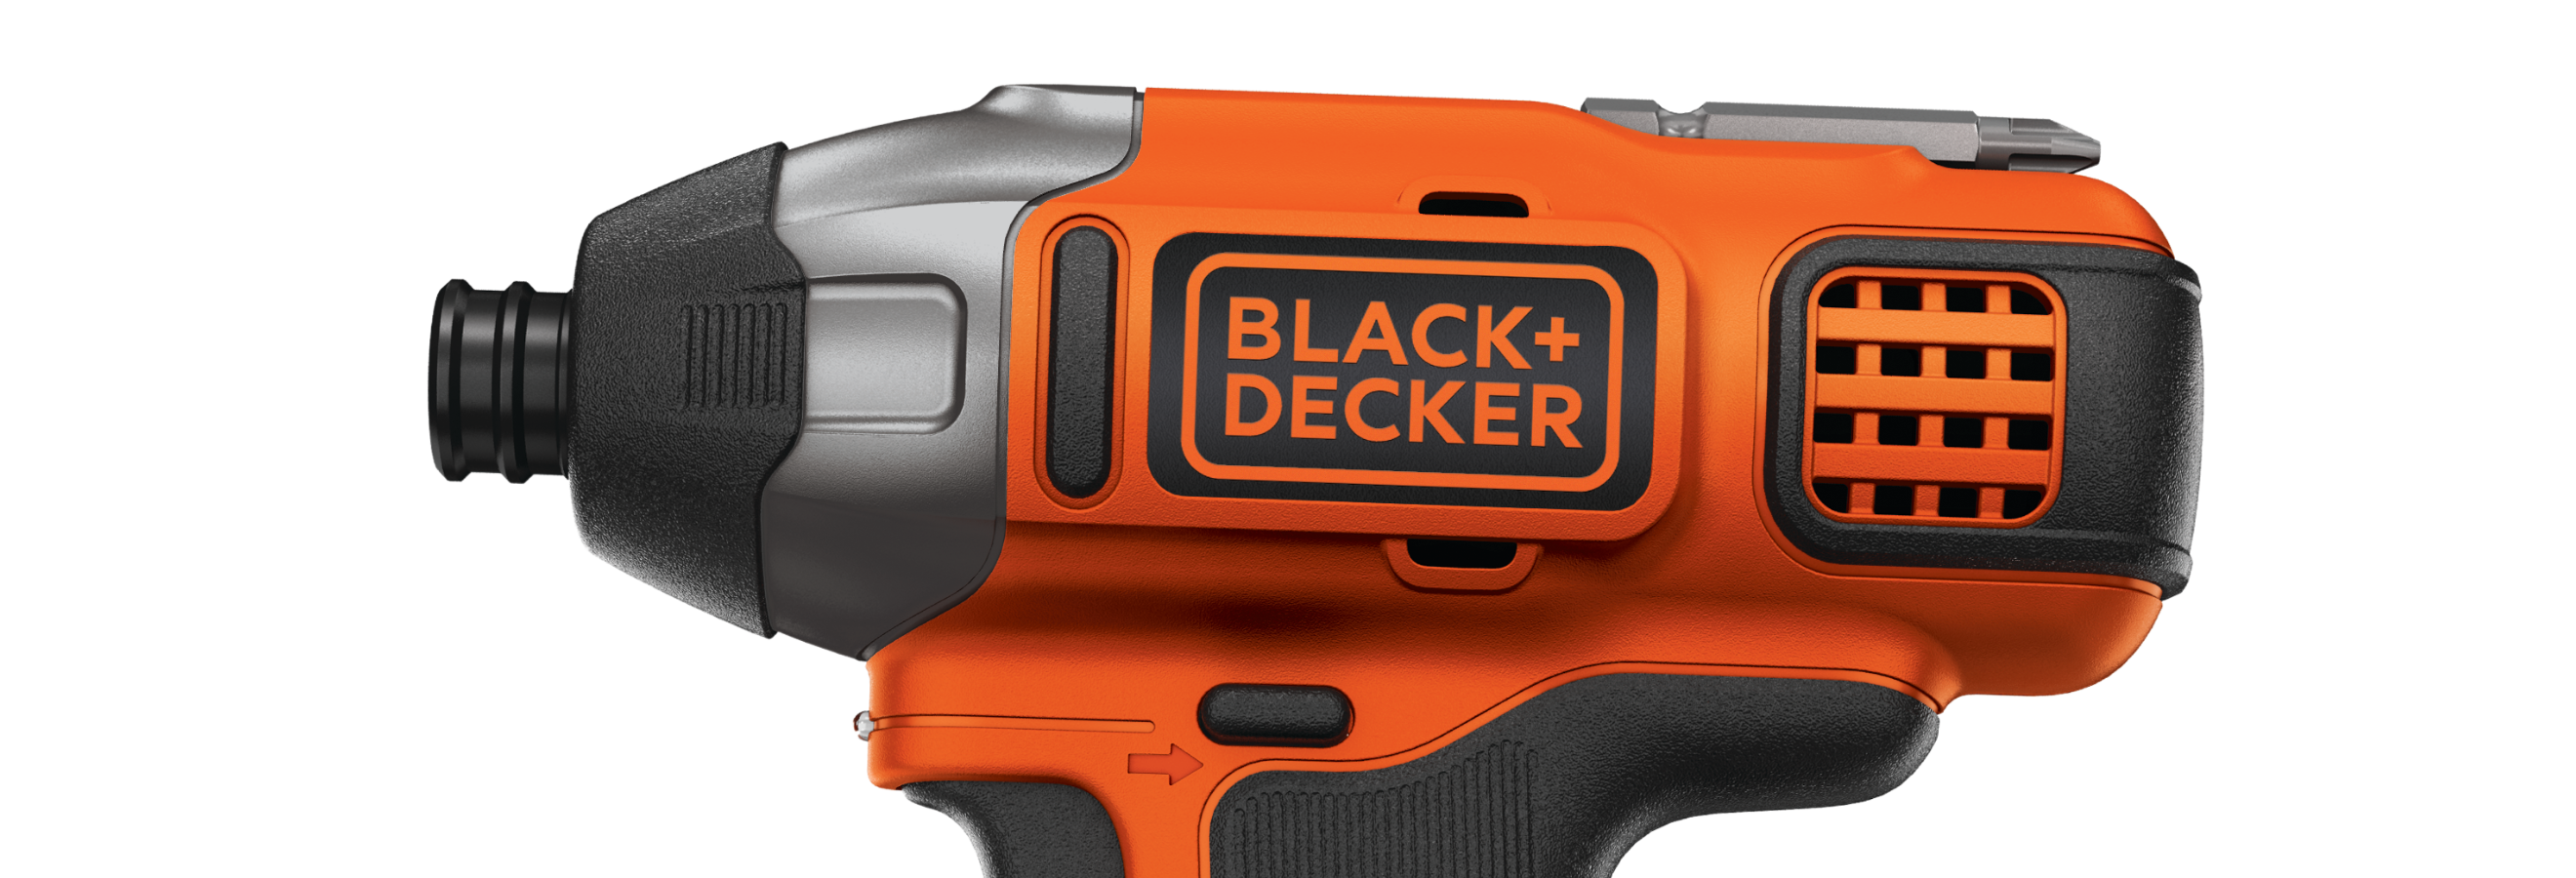 BLACK+DECKER 20V MAX* POWERCONNECT 1/4 in. Cordless Impact Driver, Tool  Only (BDCI20B) 